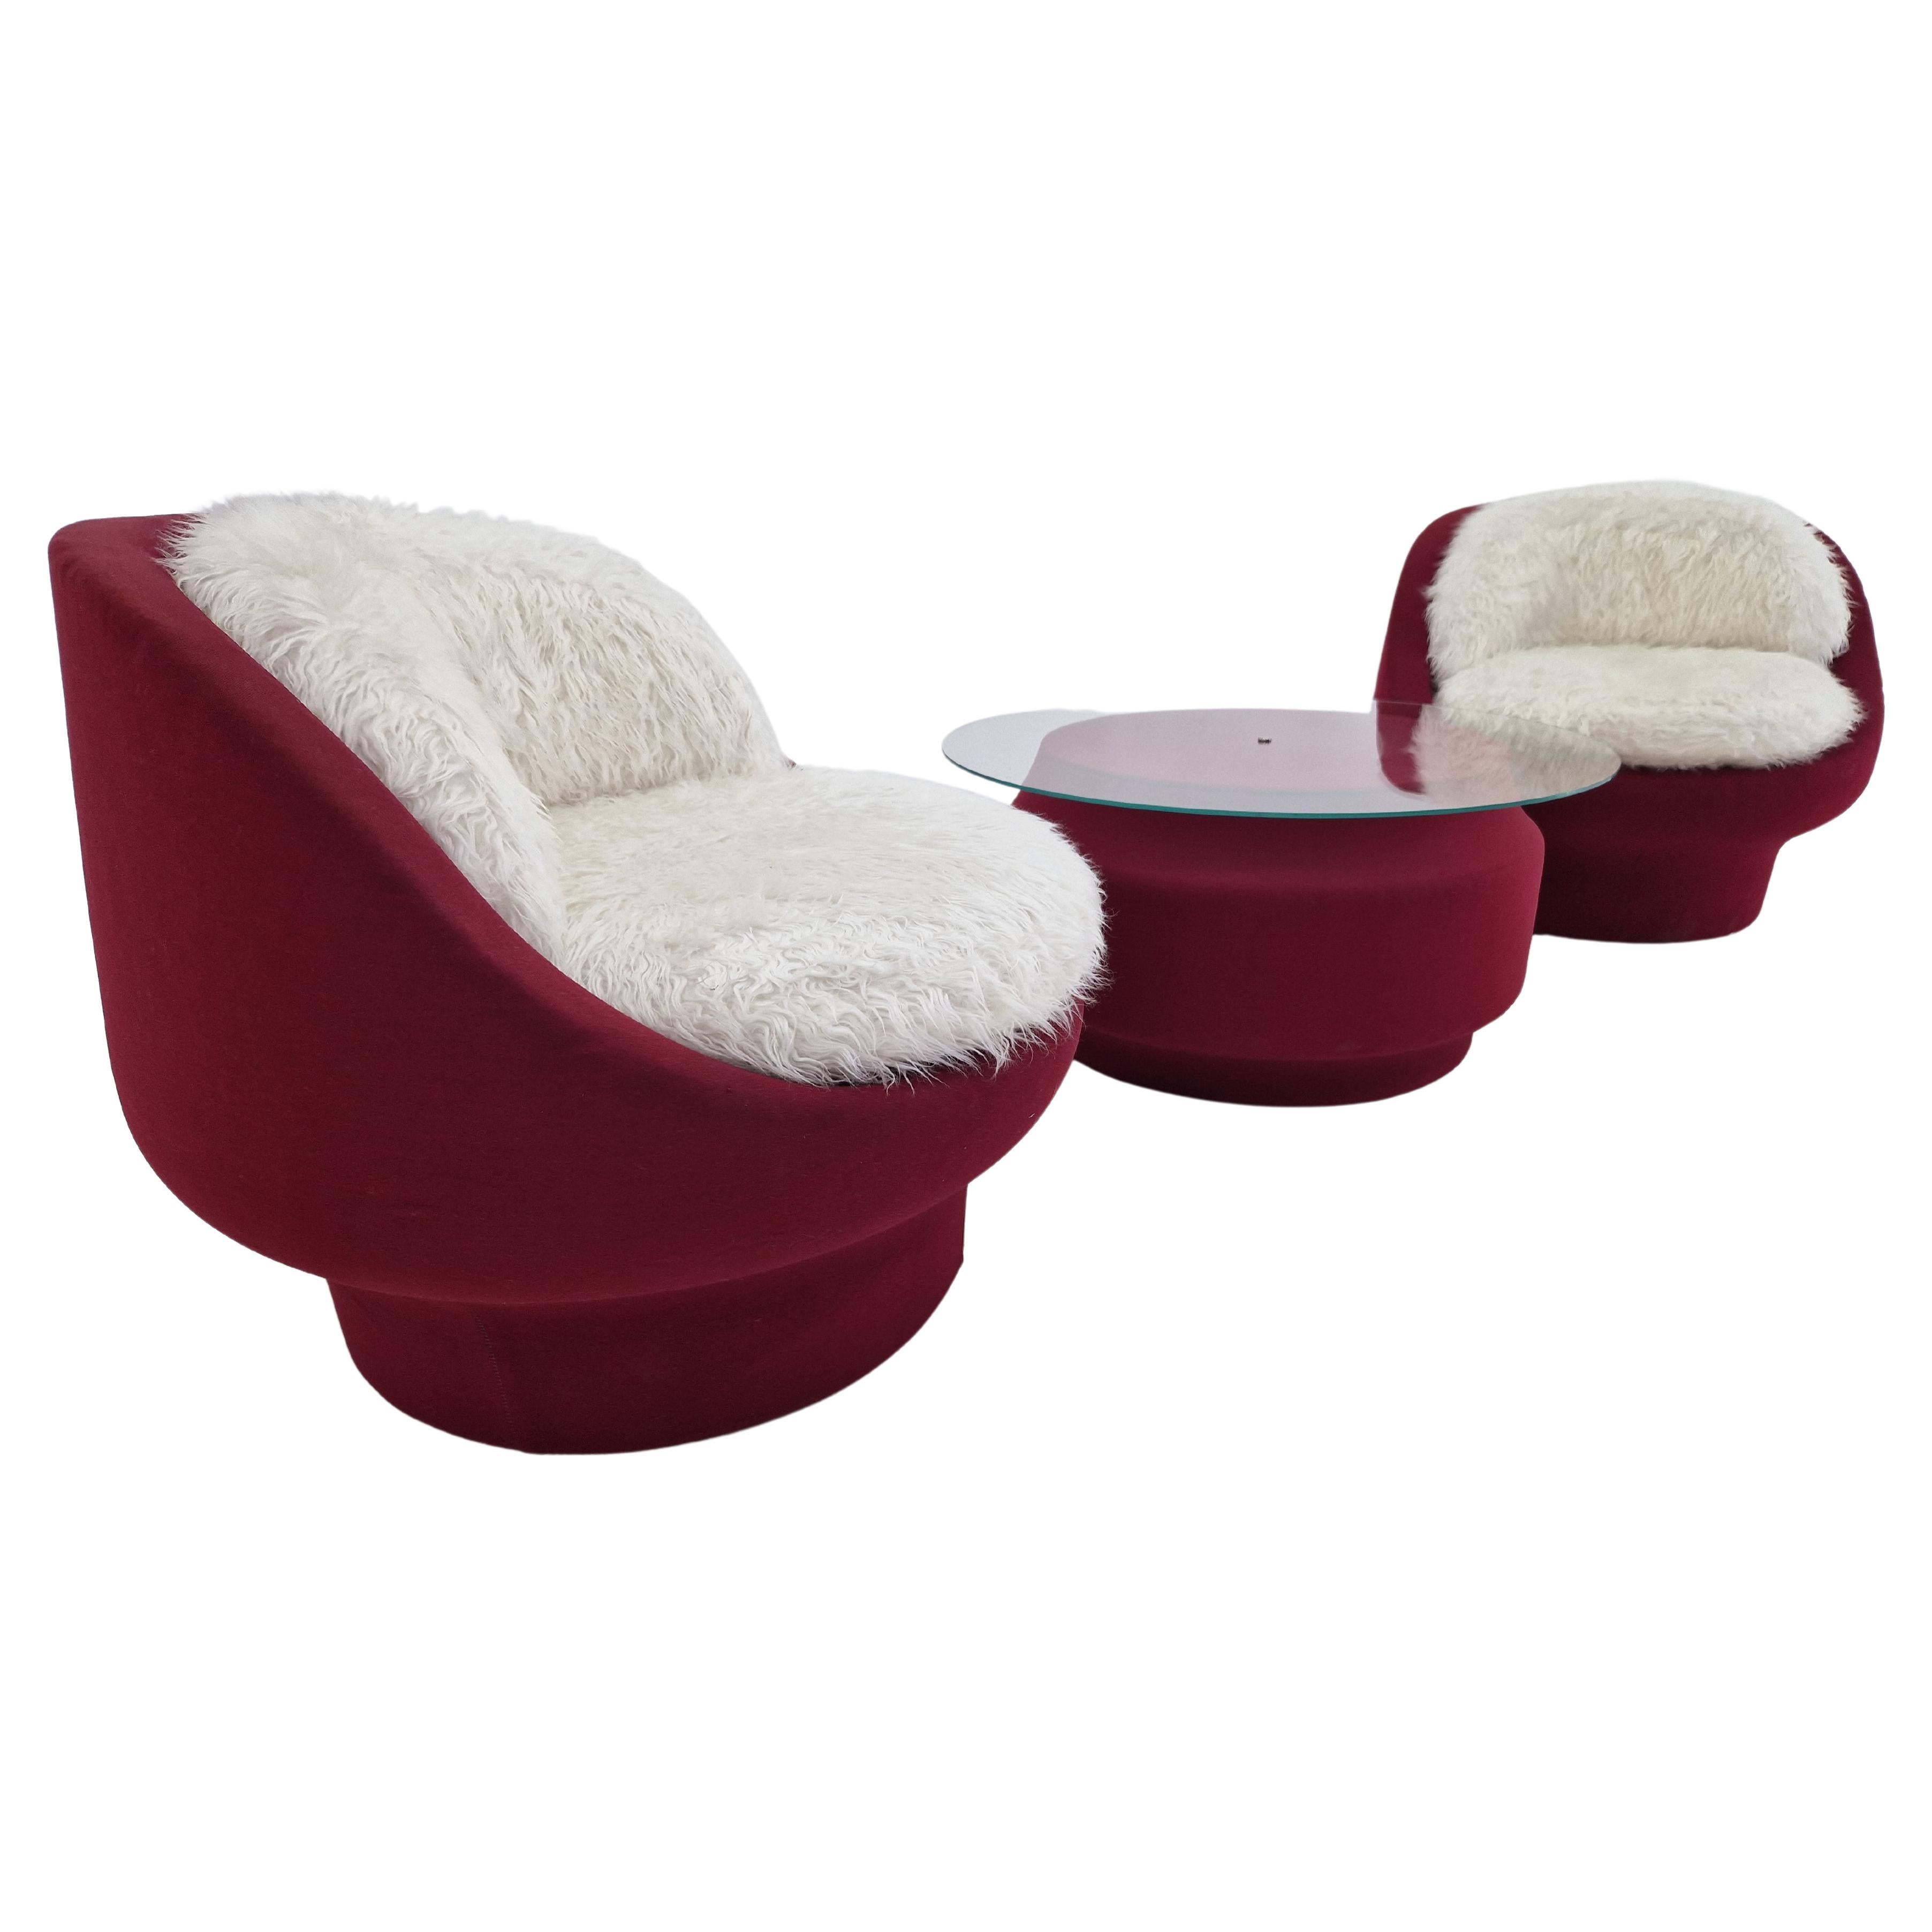 Set of Two Lounge or Club Chairs and Coffee Table, France, 1970s